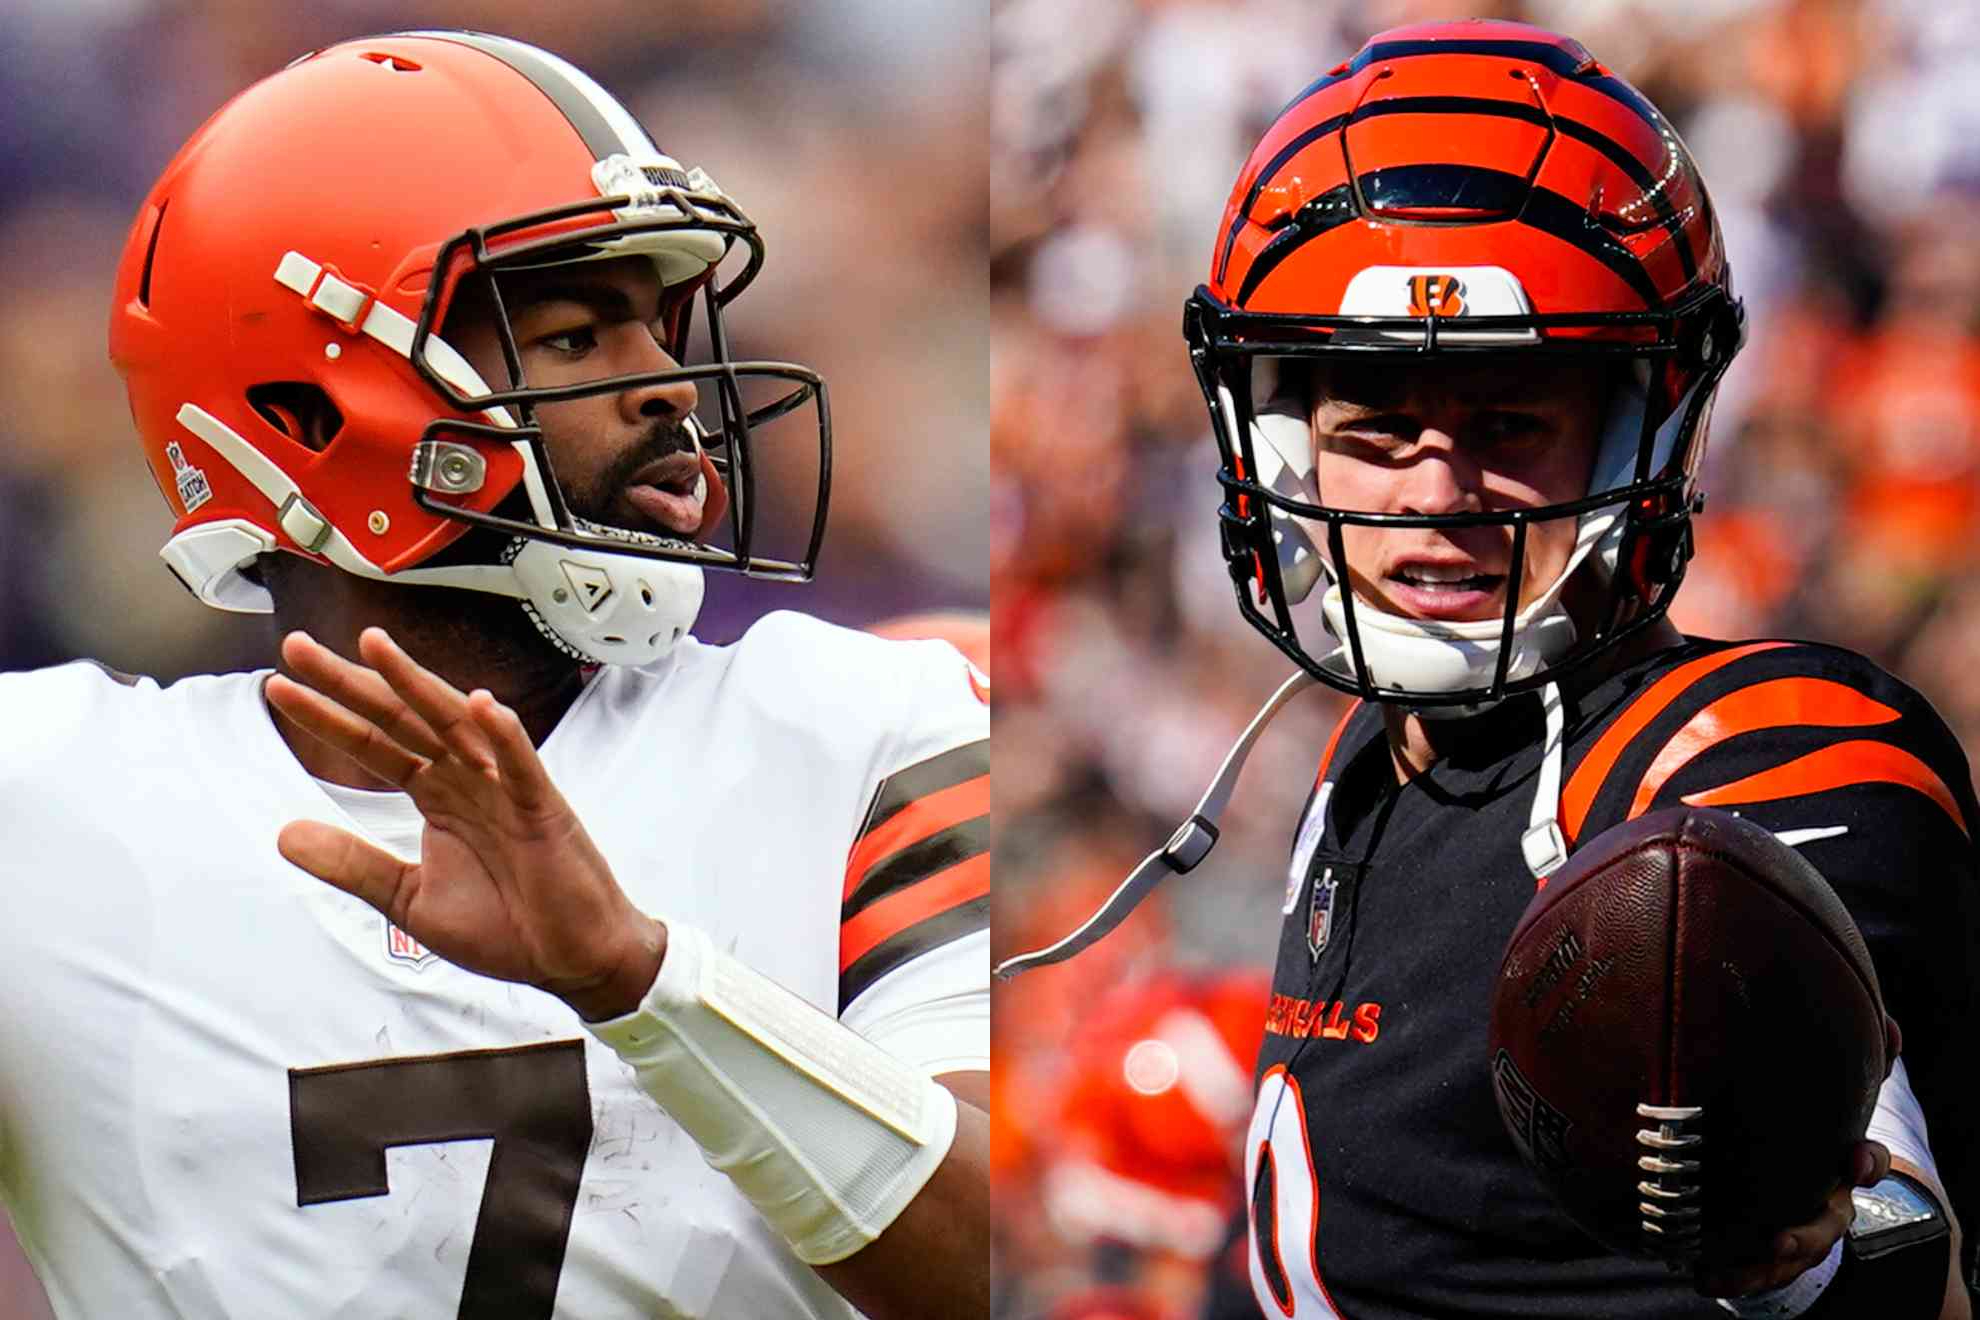 Jacoby Brissett and Joe Burrow will battle to lead their teams to victory.